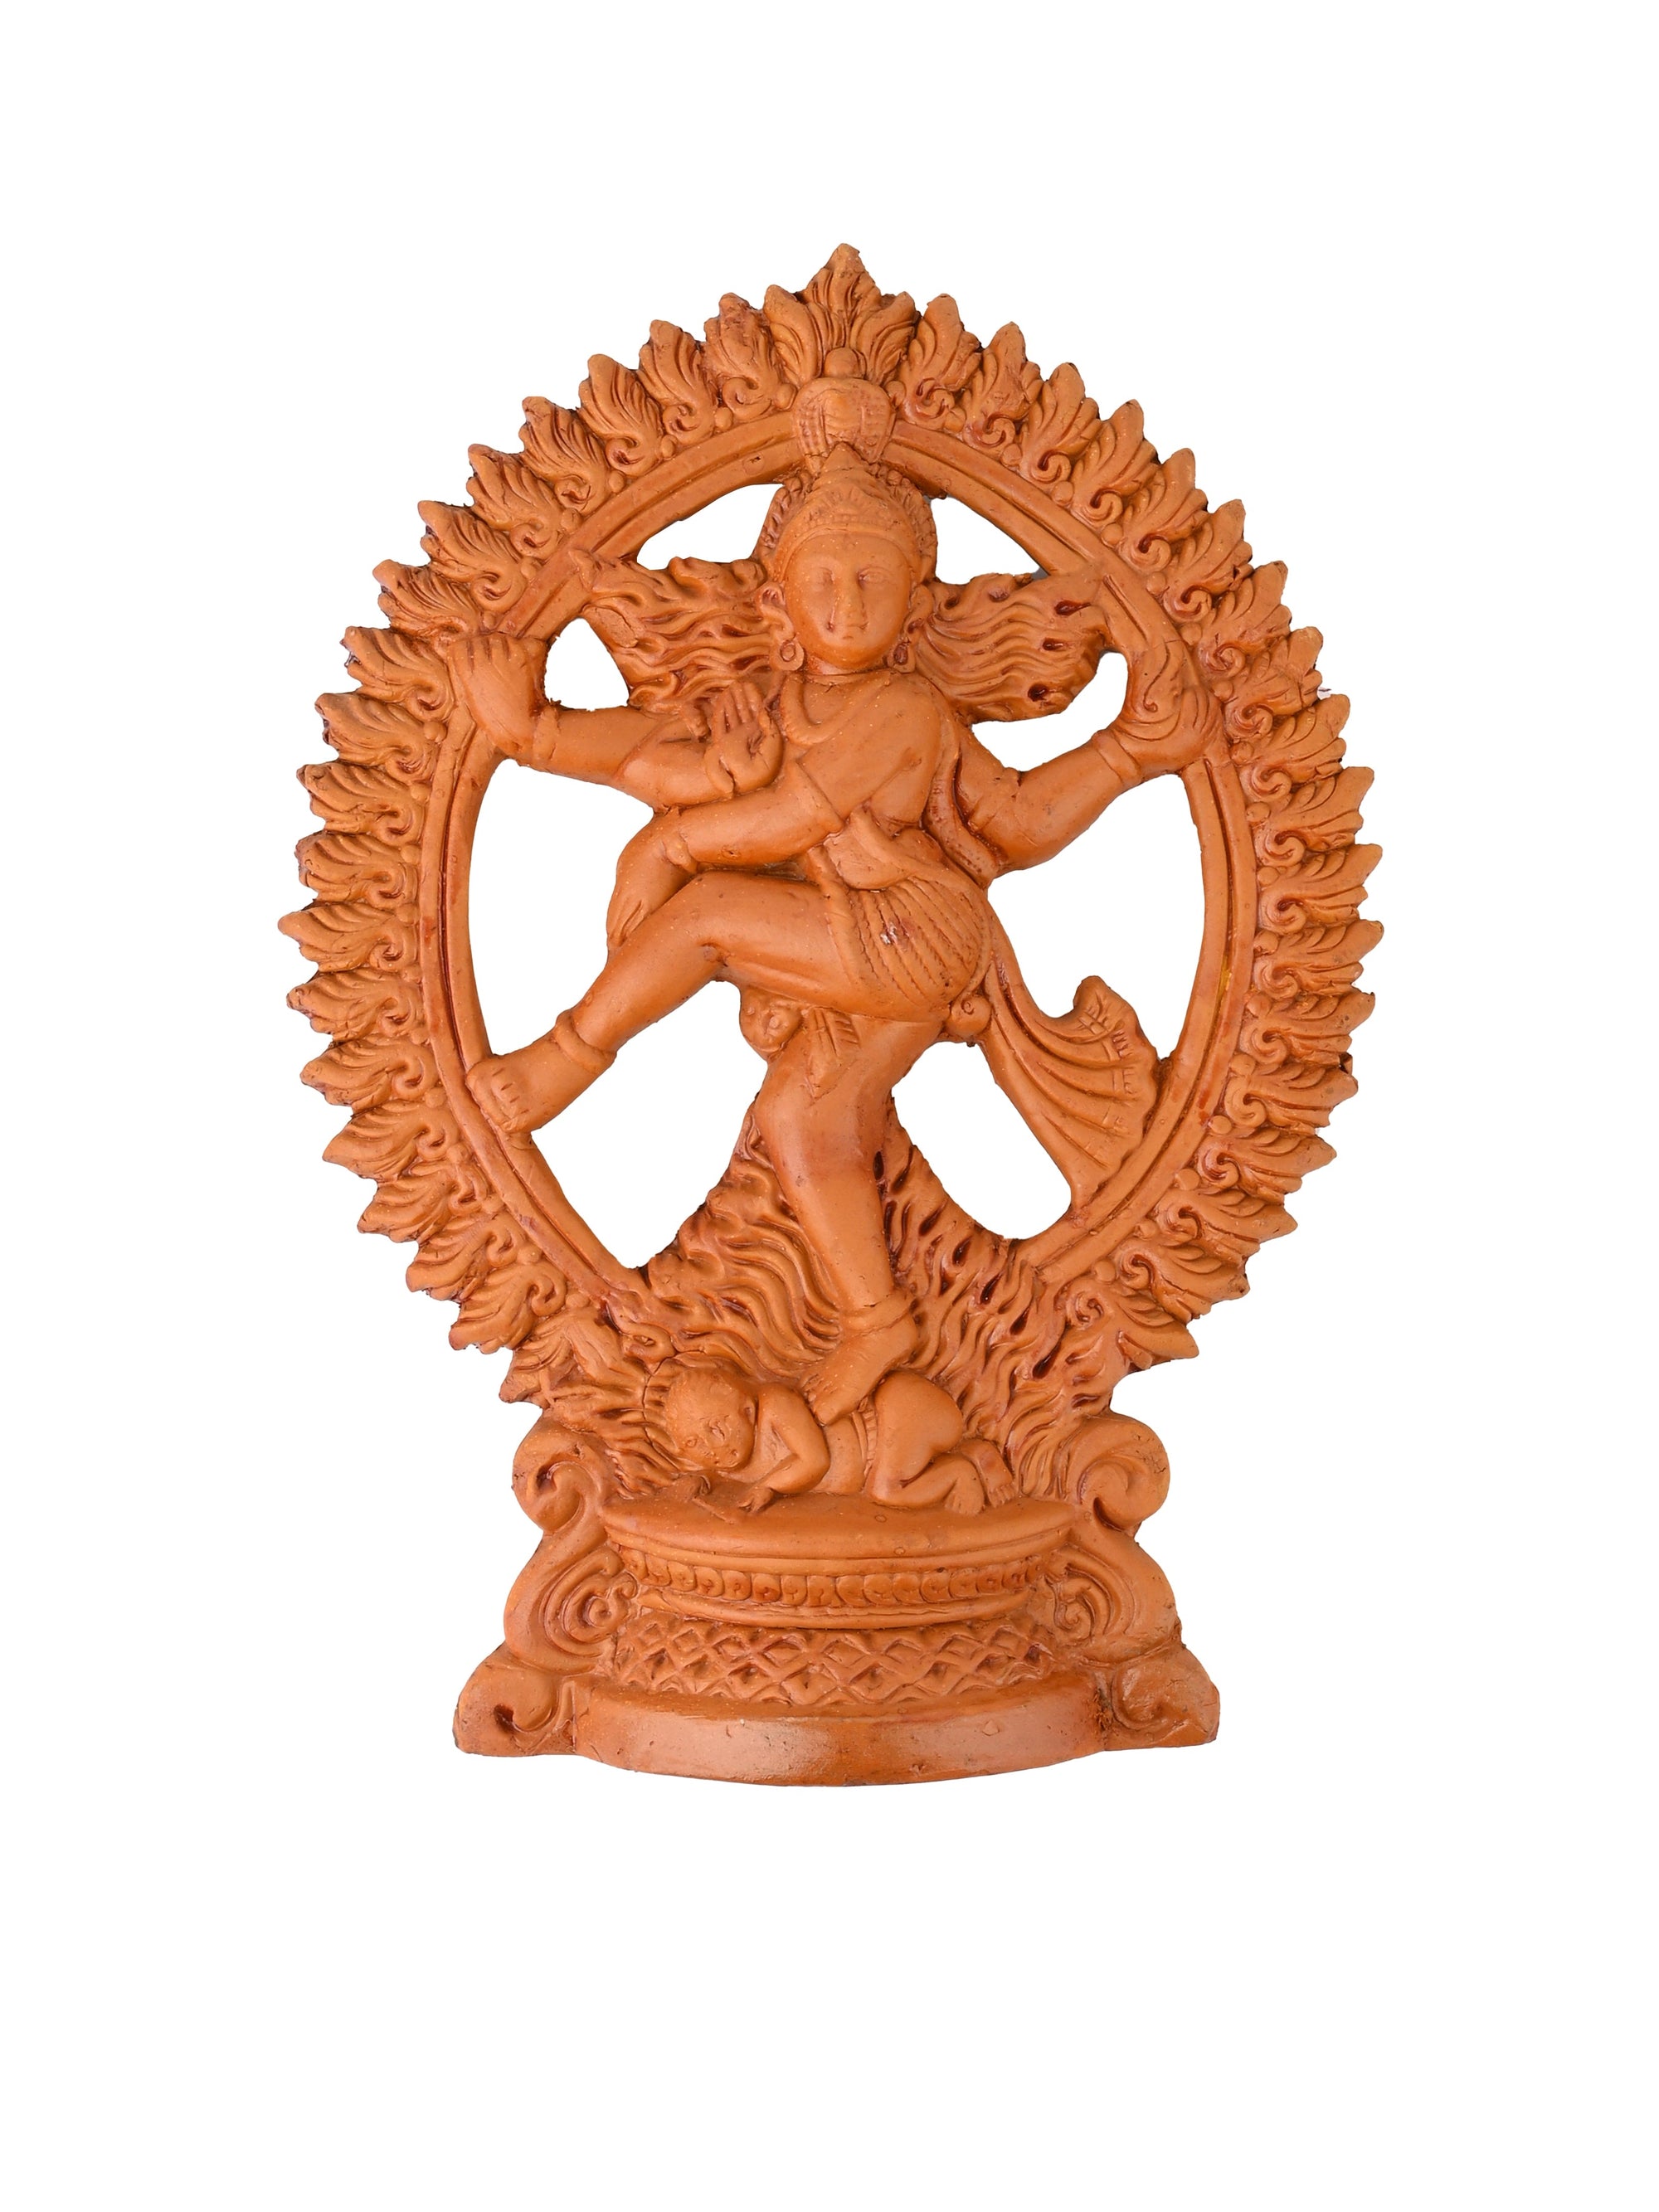 Terracotta Handcrafted Lord Nataraj Home Decor - 12 inches Height